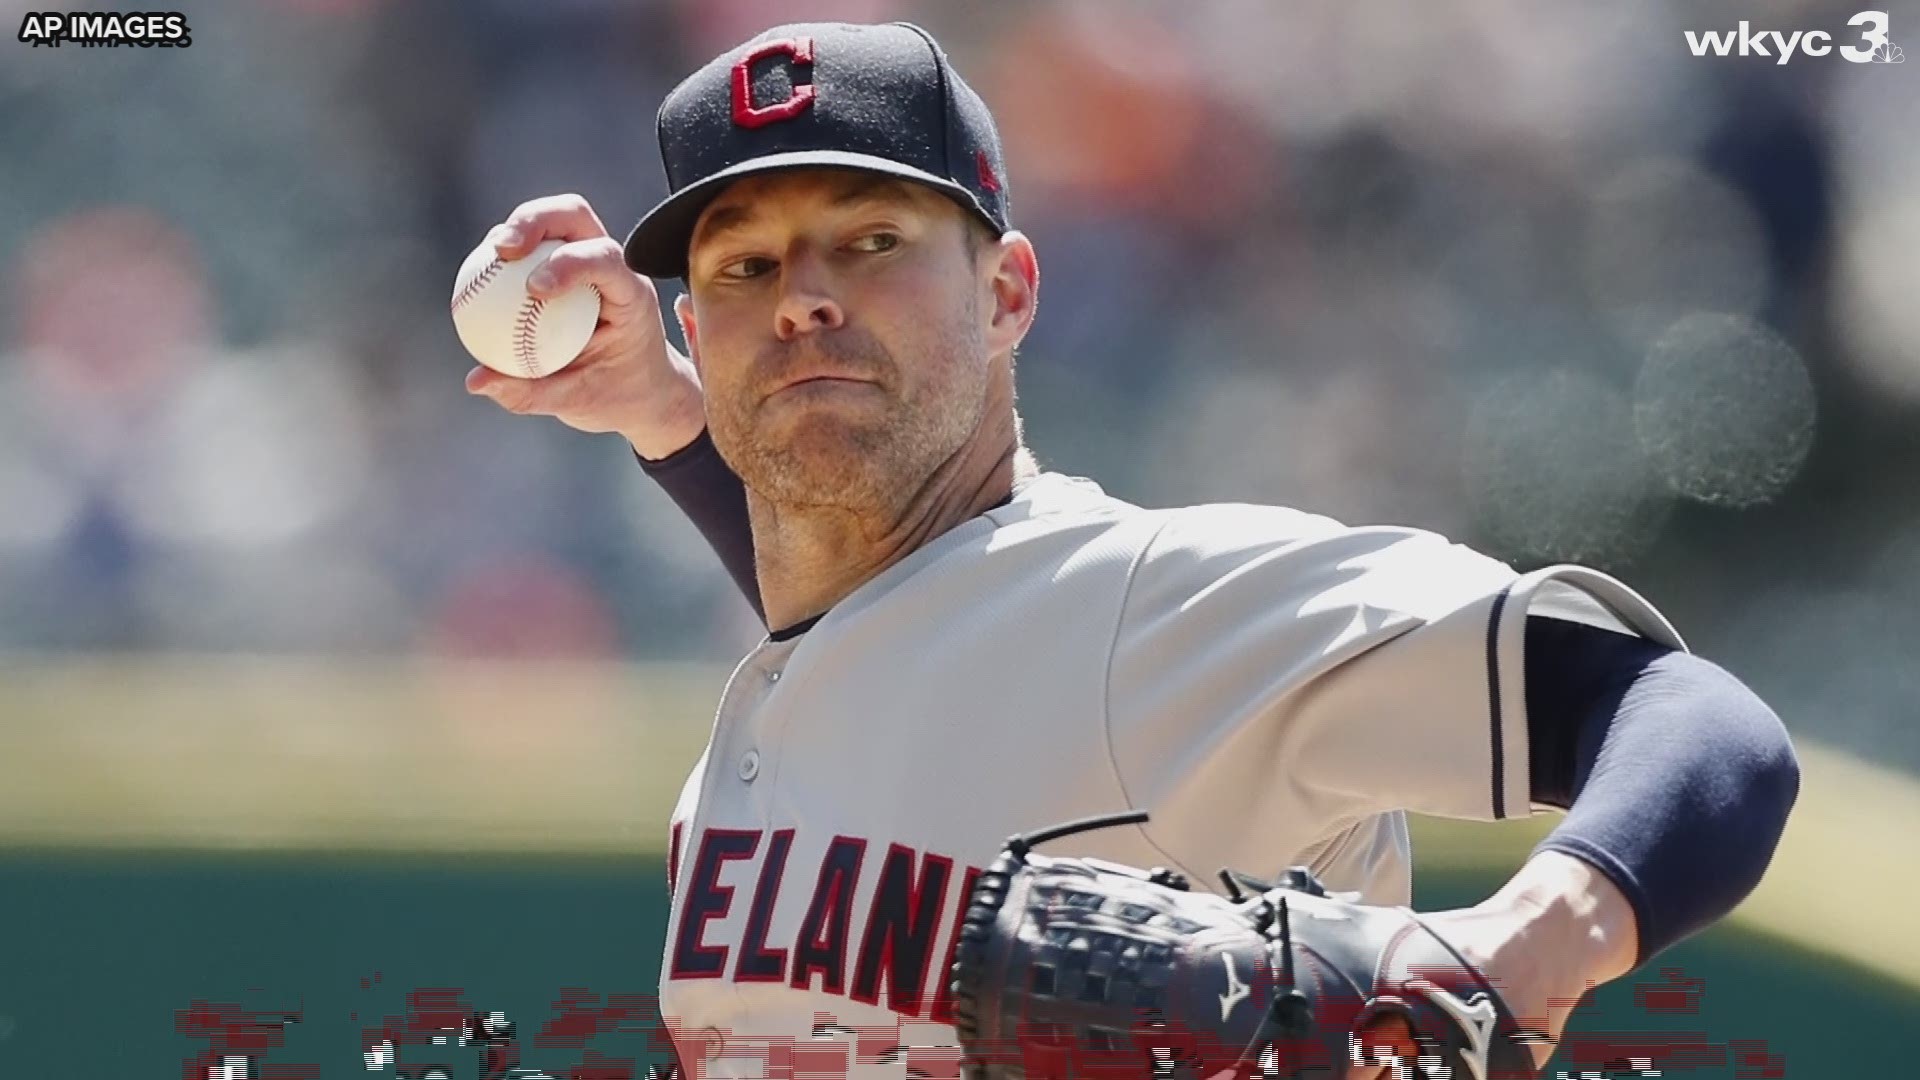 Another setback for the Tribe ace.  The Cleveland Indians announced on Tuesday that starting pitcher Corey Kluber has been shut down for two weeks with an oblique strain.